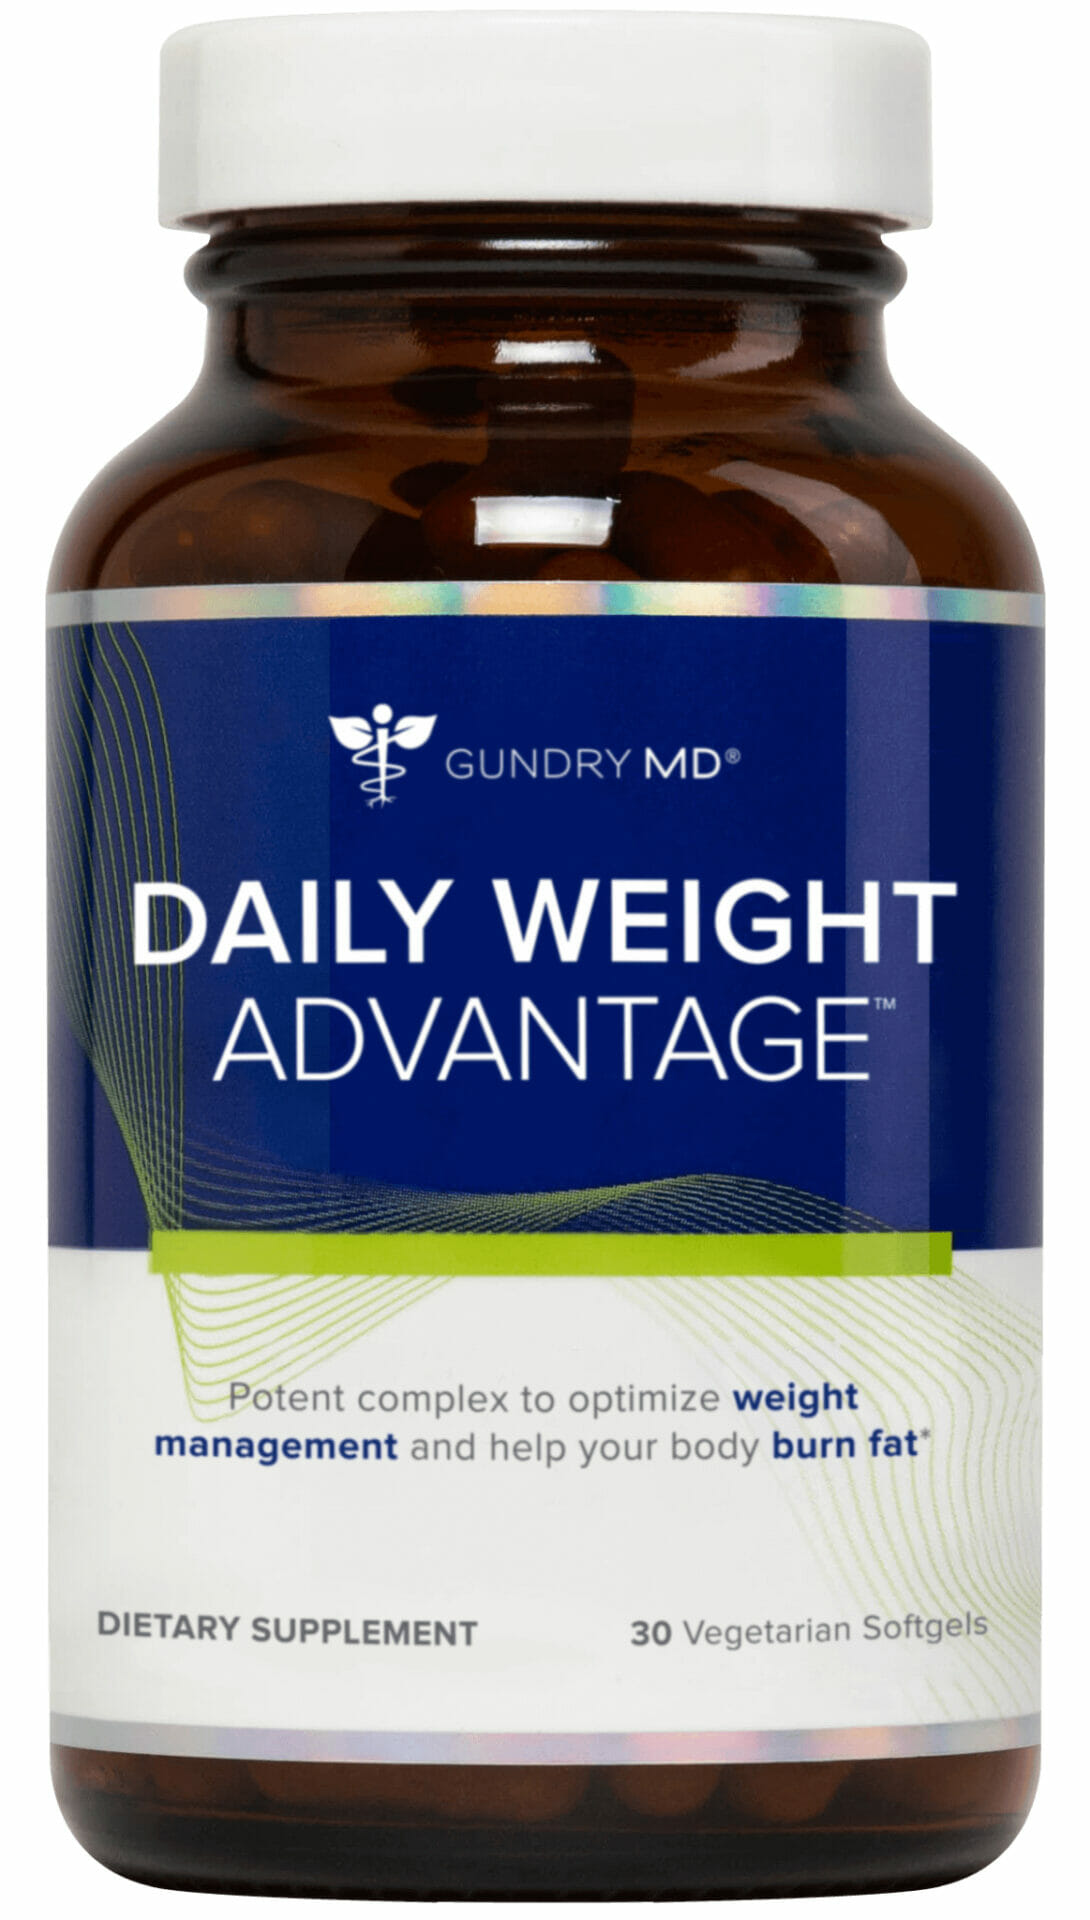 Daily Weight Advantage